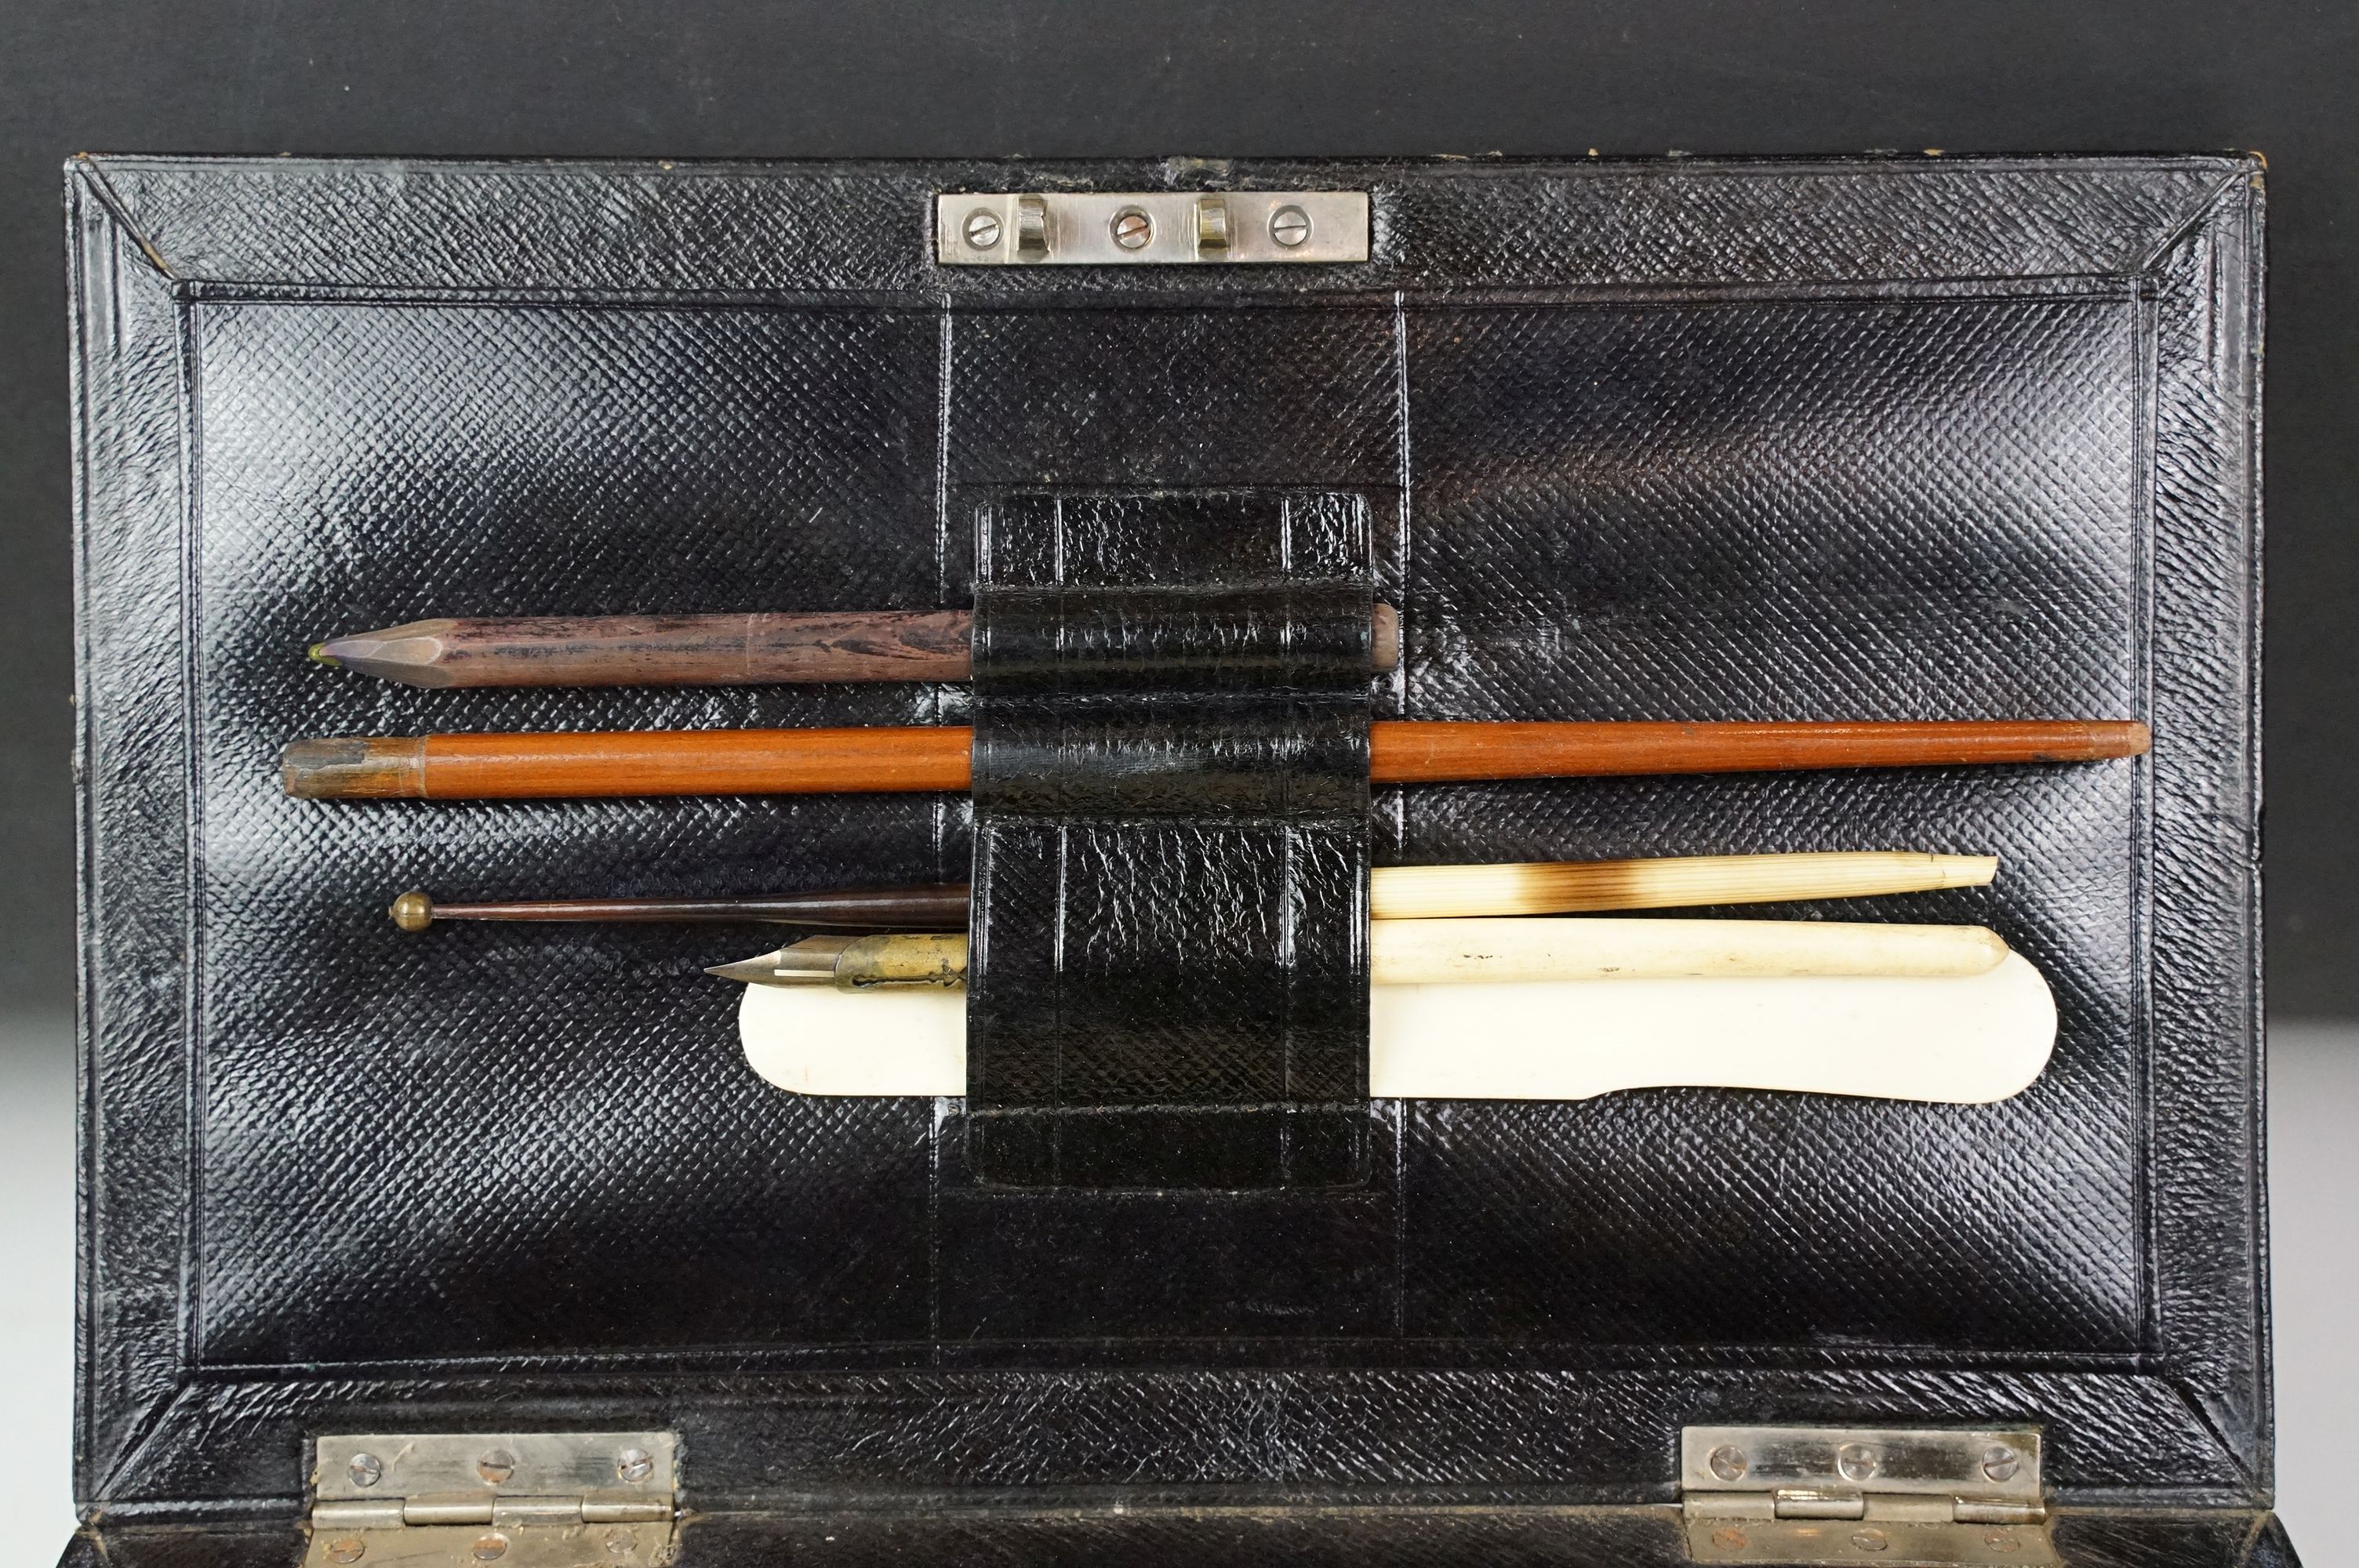 Late 19th / early 20th century leather clad stationery box, the contents to include dip pen, - Image 3 of 7